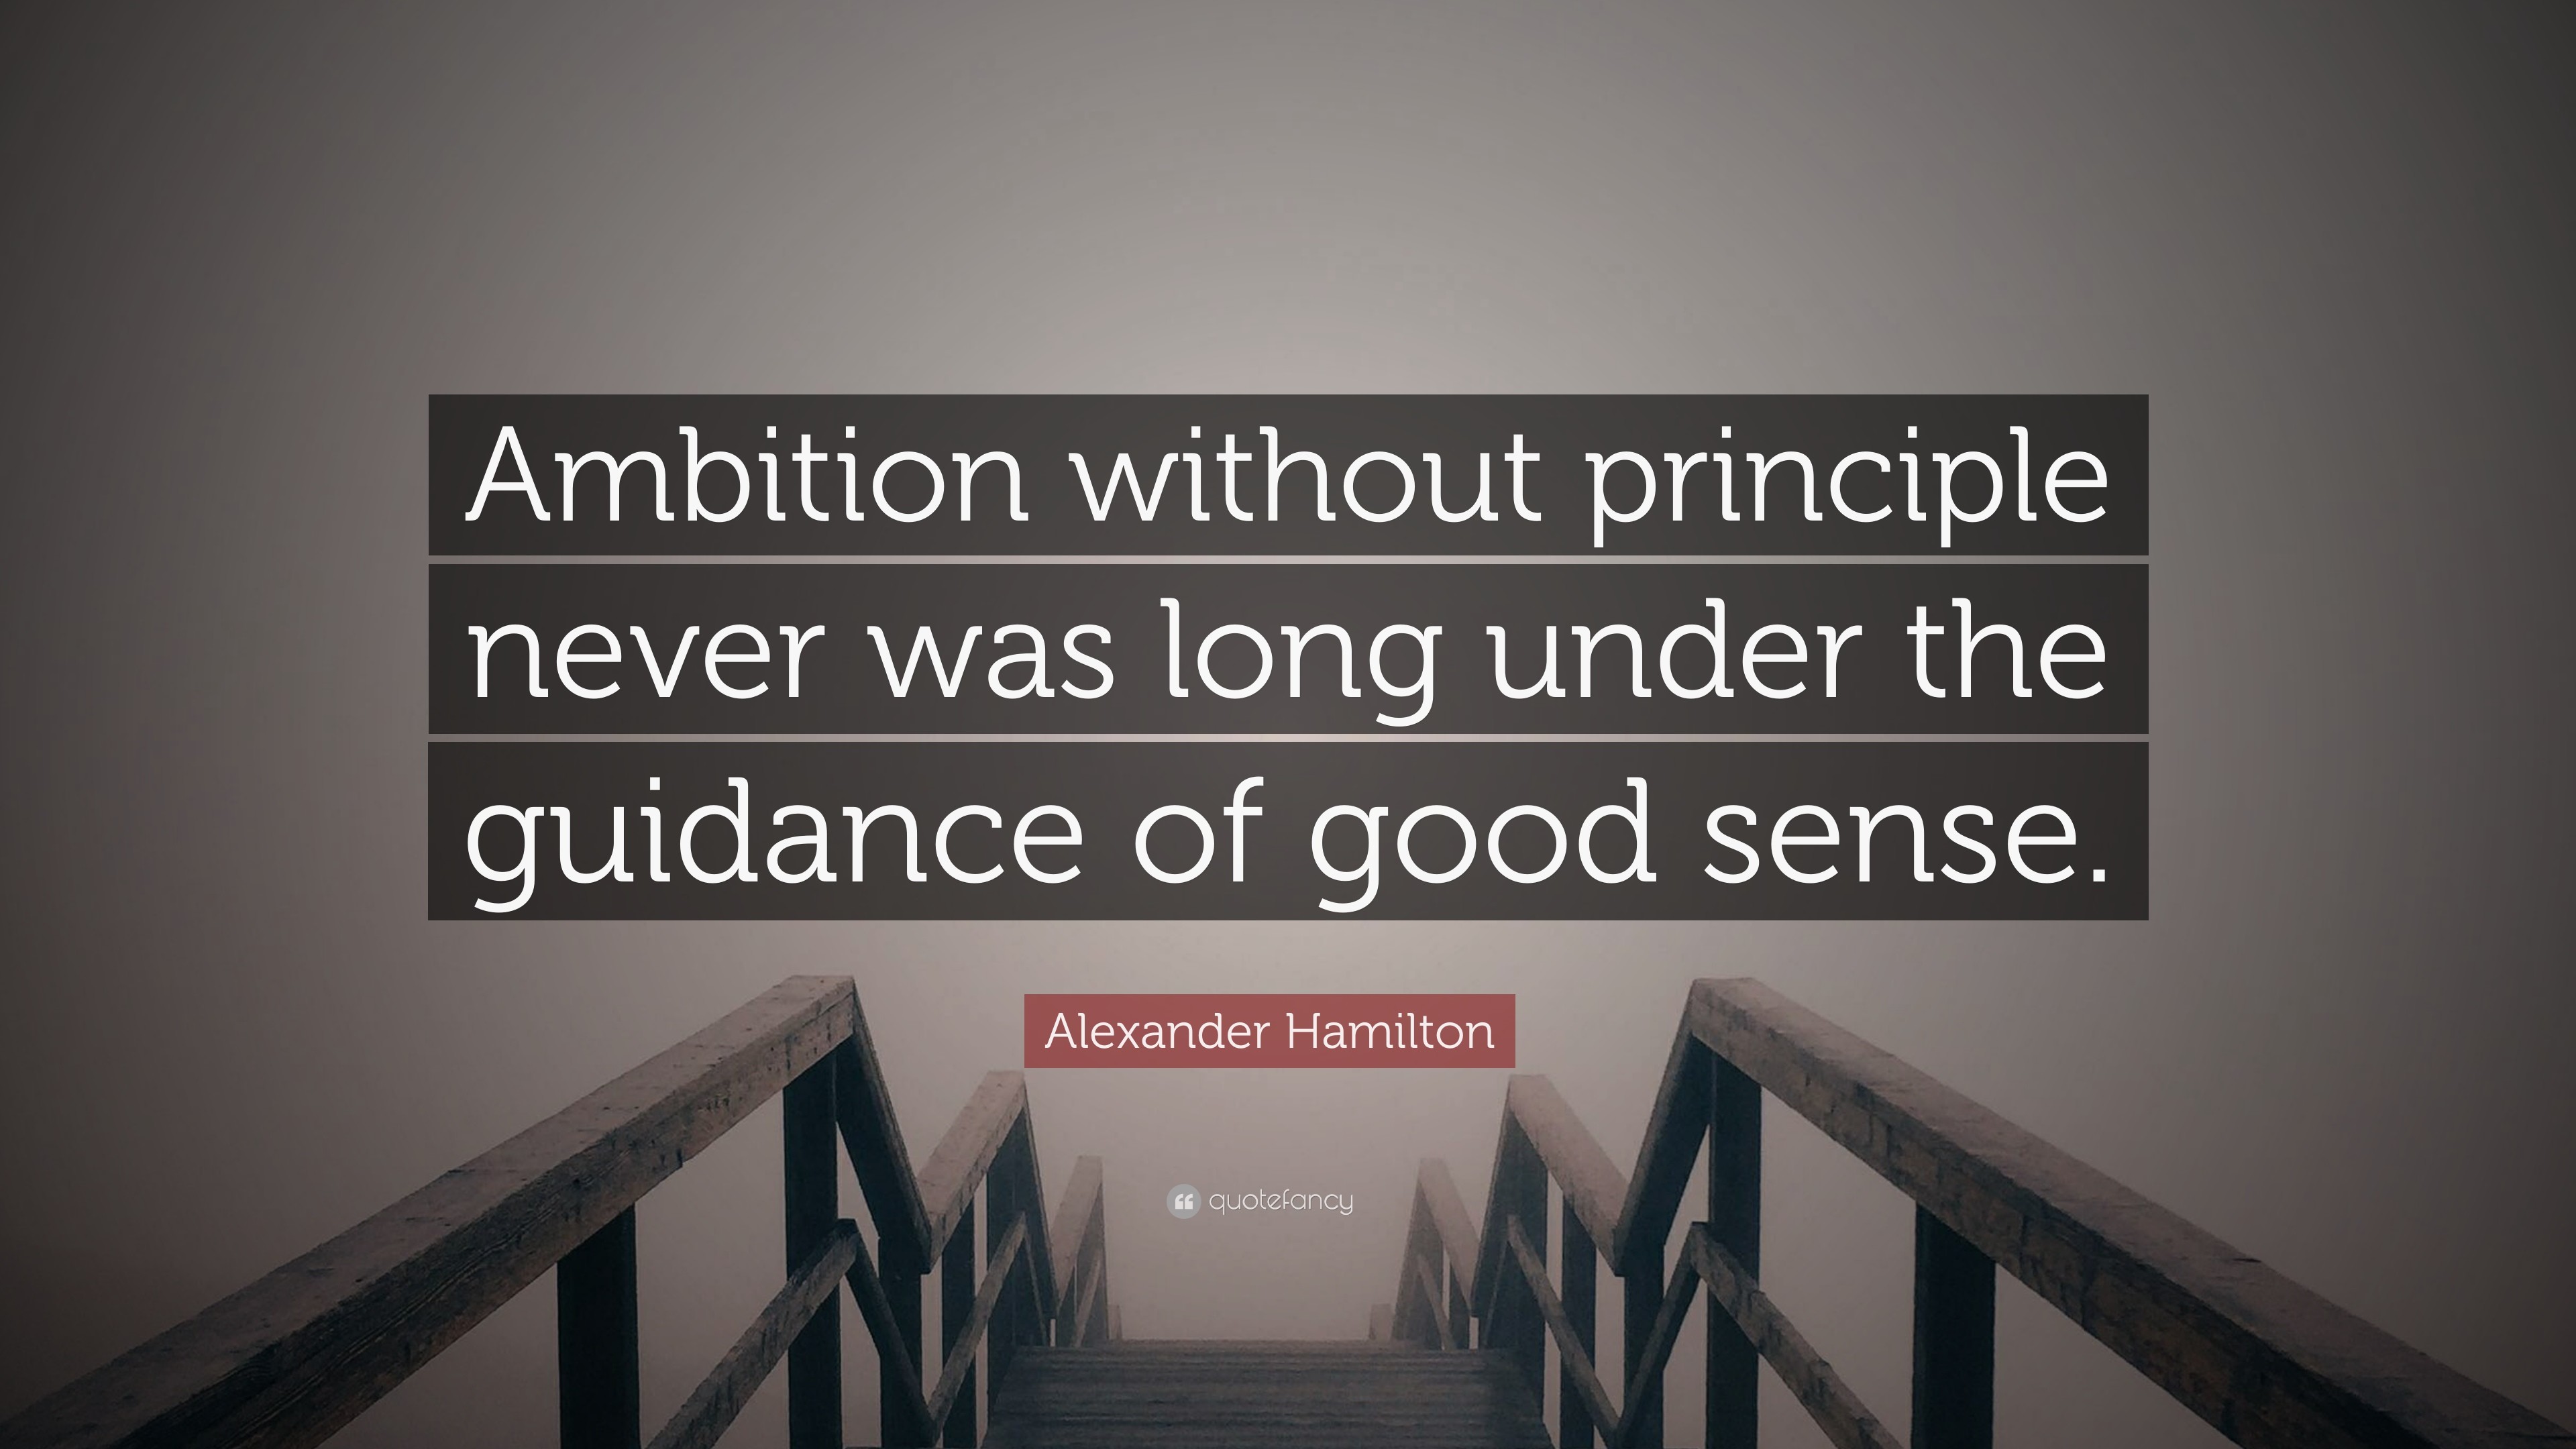 Alexander Hamilton Quote Ambition without principle never was long under the guidance of good